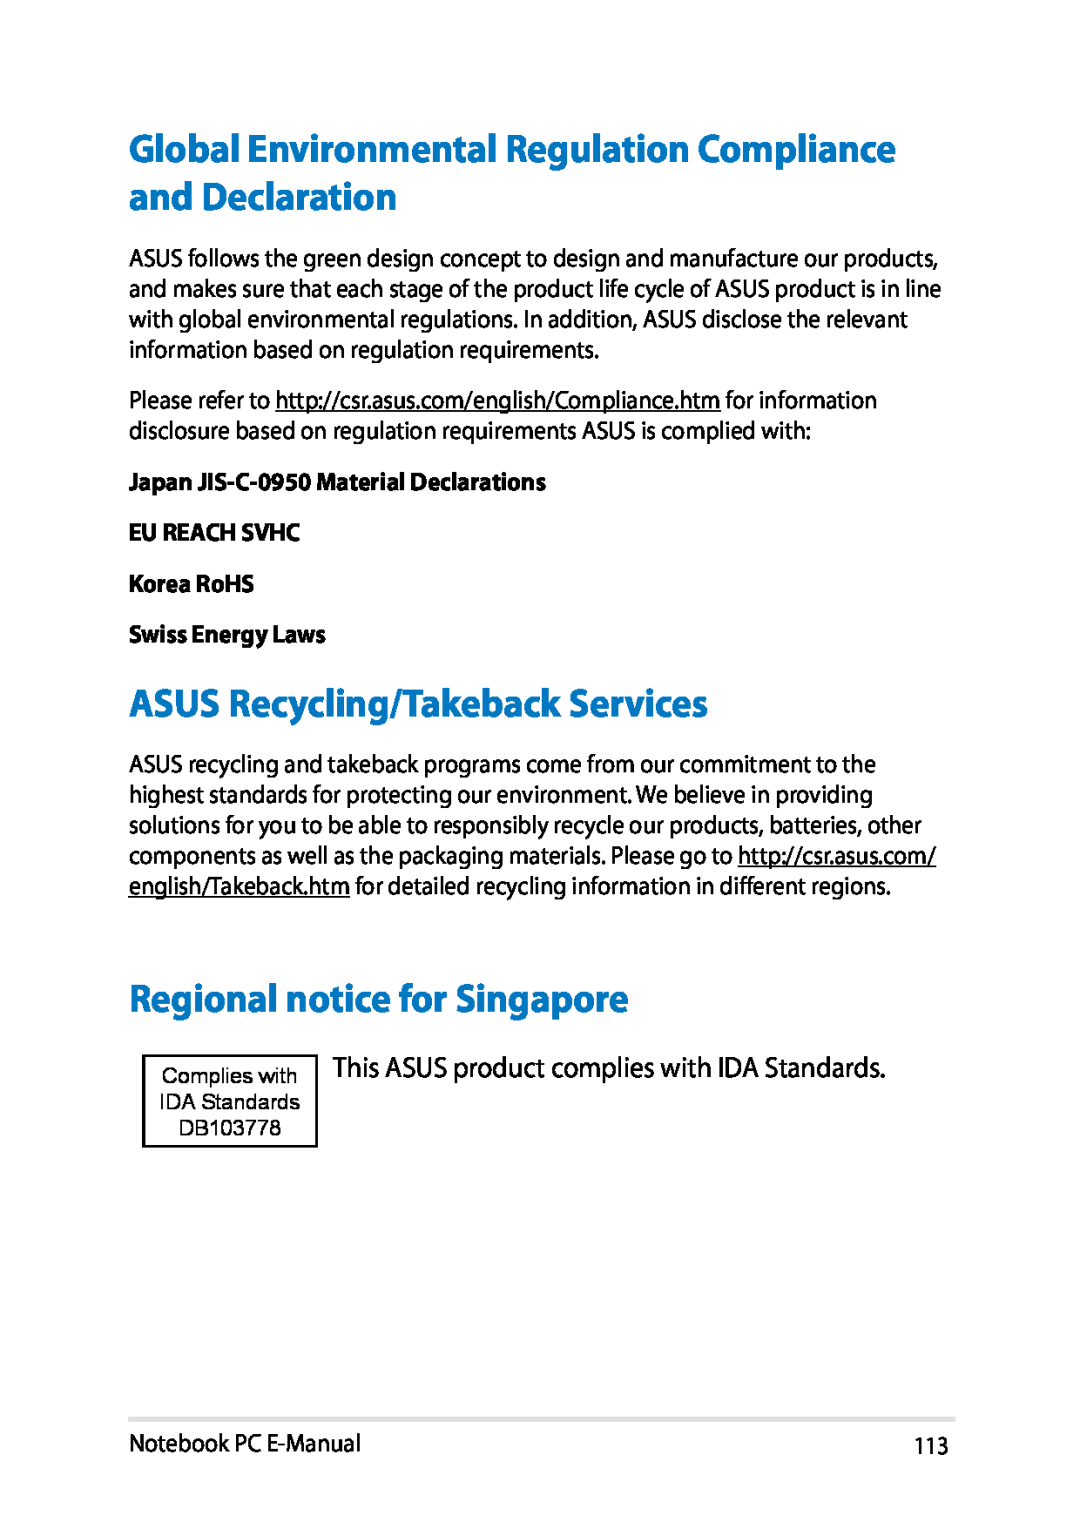 Asus E8438 Global Environmental Regulation Compliance and Declaration, ASUS Recycling/Takeback Services, Swiss Energy Laws 